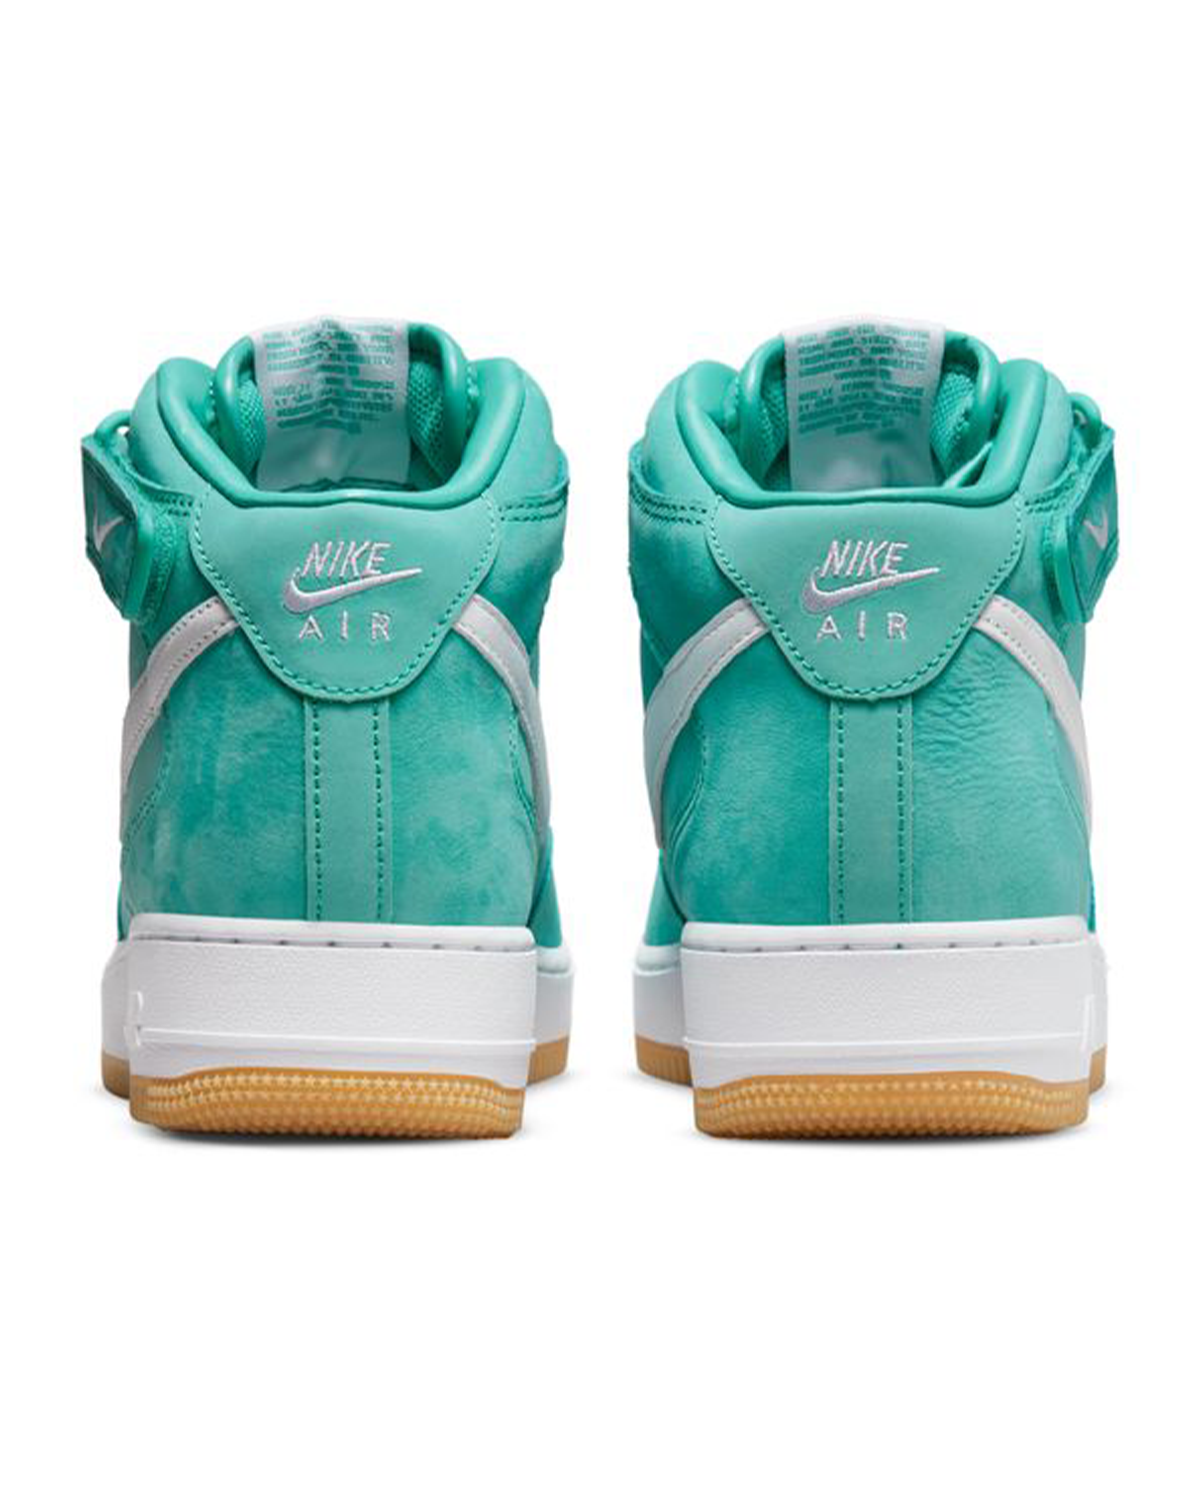 Air Force 1 Mid Premium Washed Teal/White/Gum